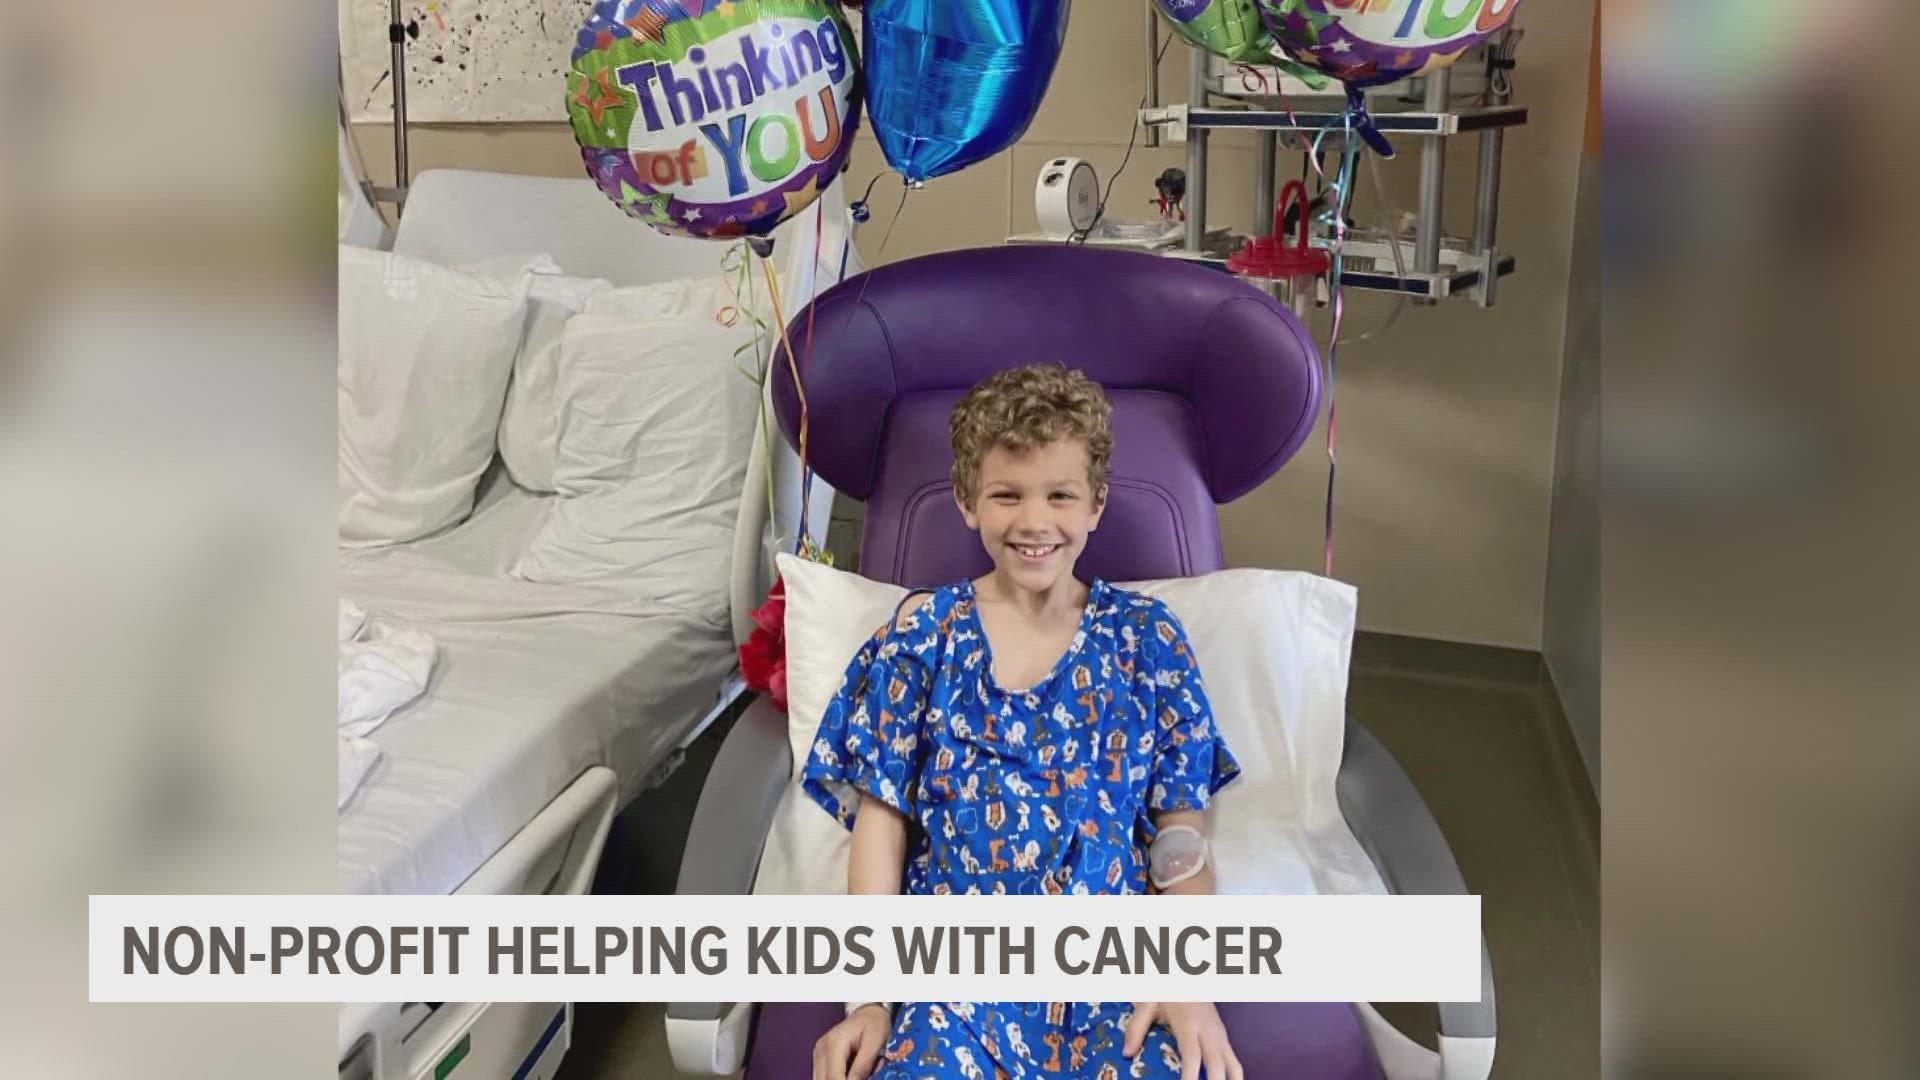 A Waukee kid was diagnosed with cancer last March, and now he and his family are raising money to help other kids who experience childhood cancer.